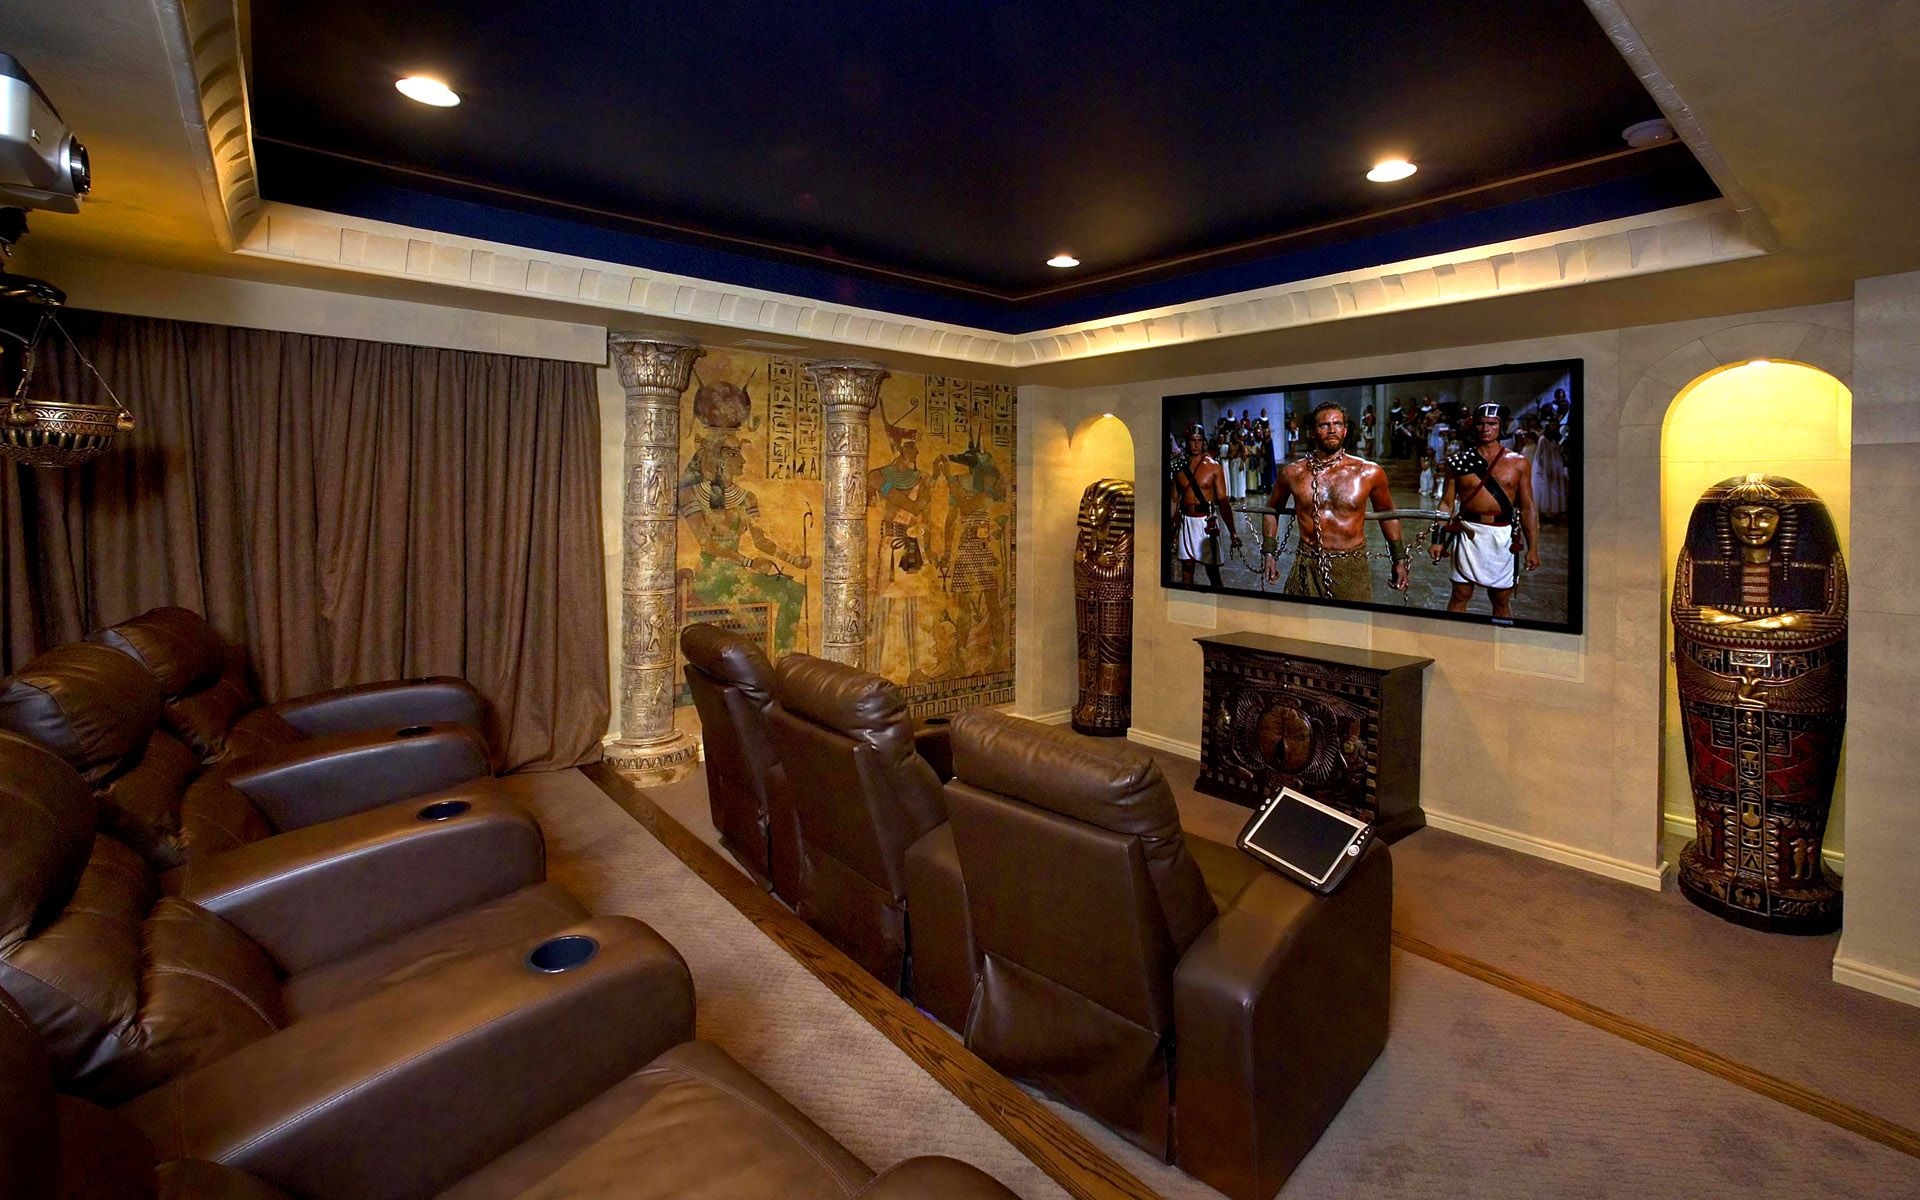 Home theater rooms, Seating arrangement, Cozy setup, Intimate movie experience, 1920x1200 HD Desktop